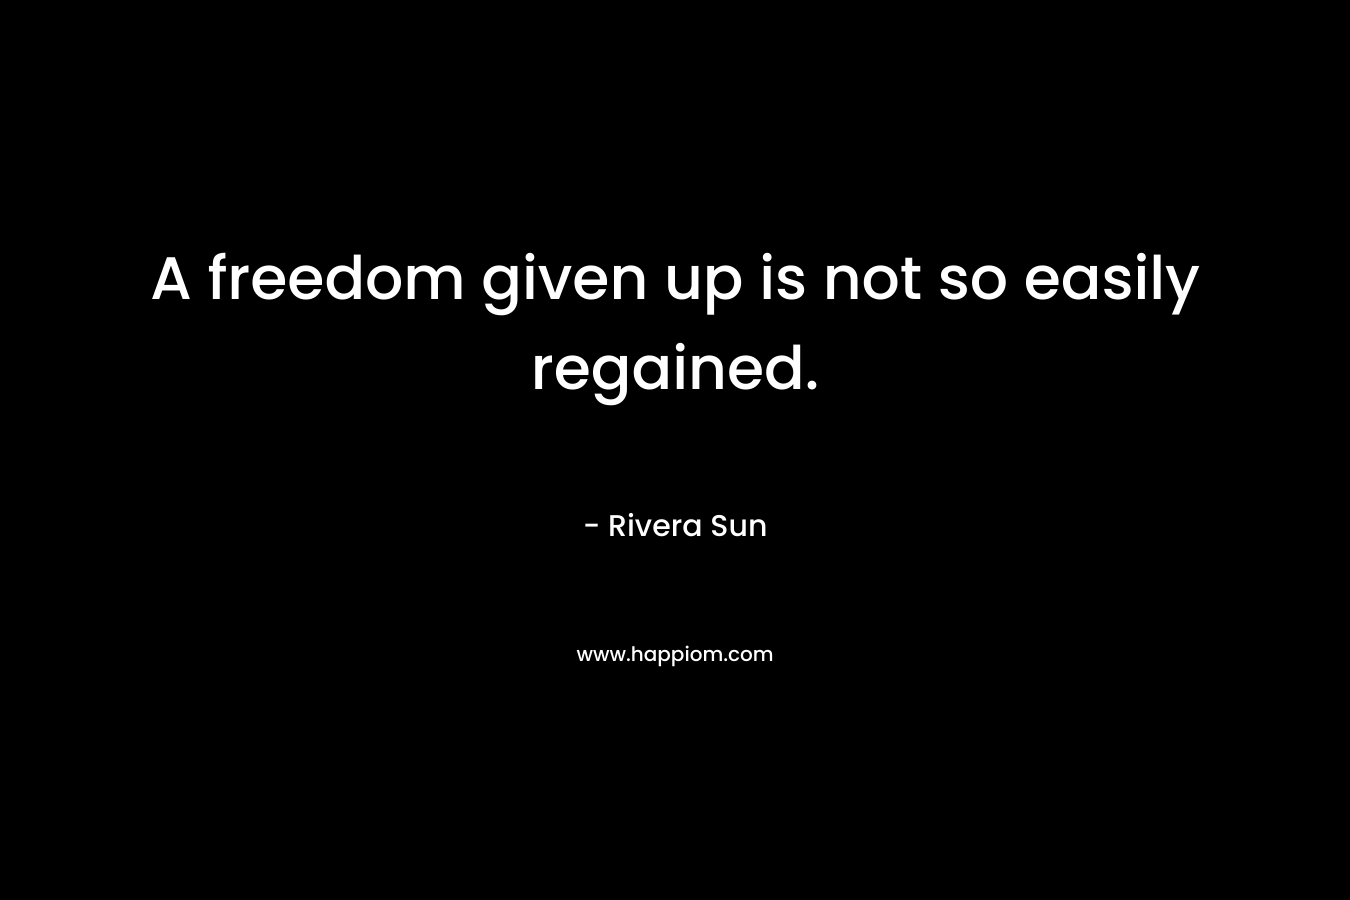 A freedom given up is not so easily regained. – Rivera Sun